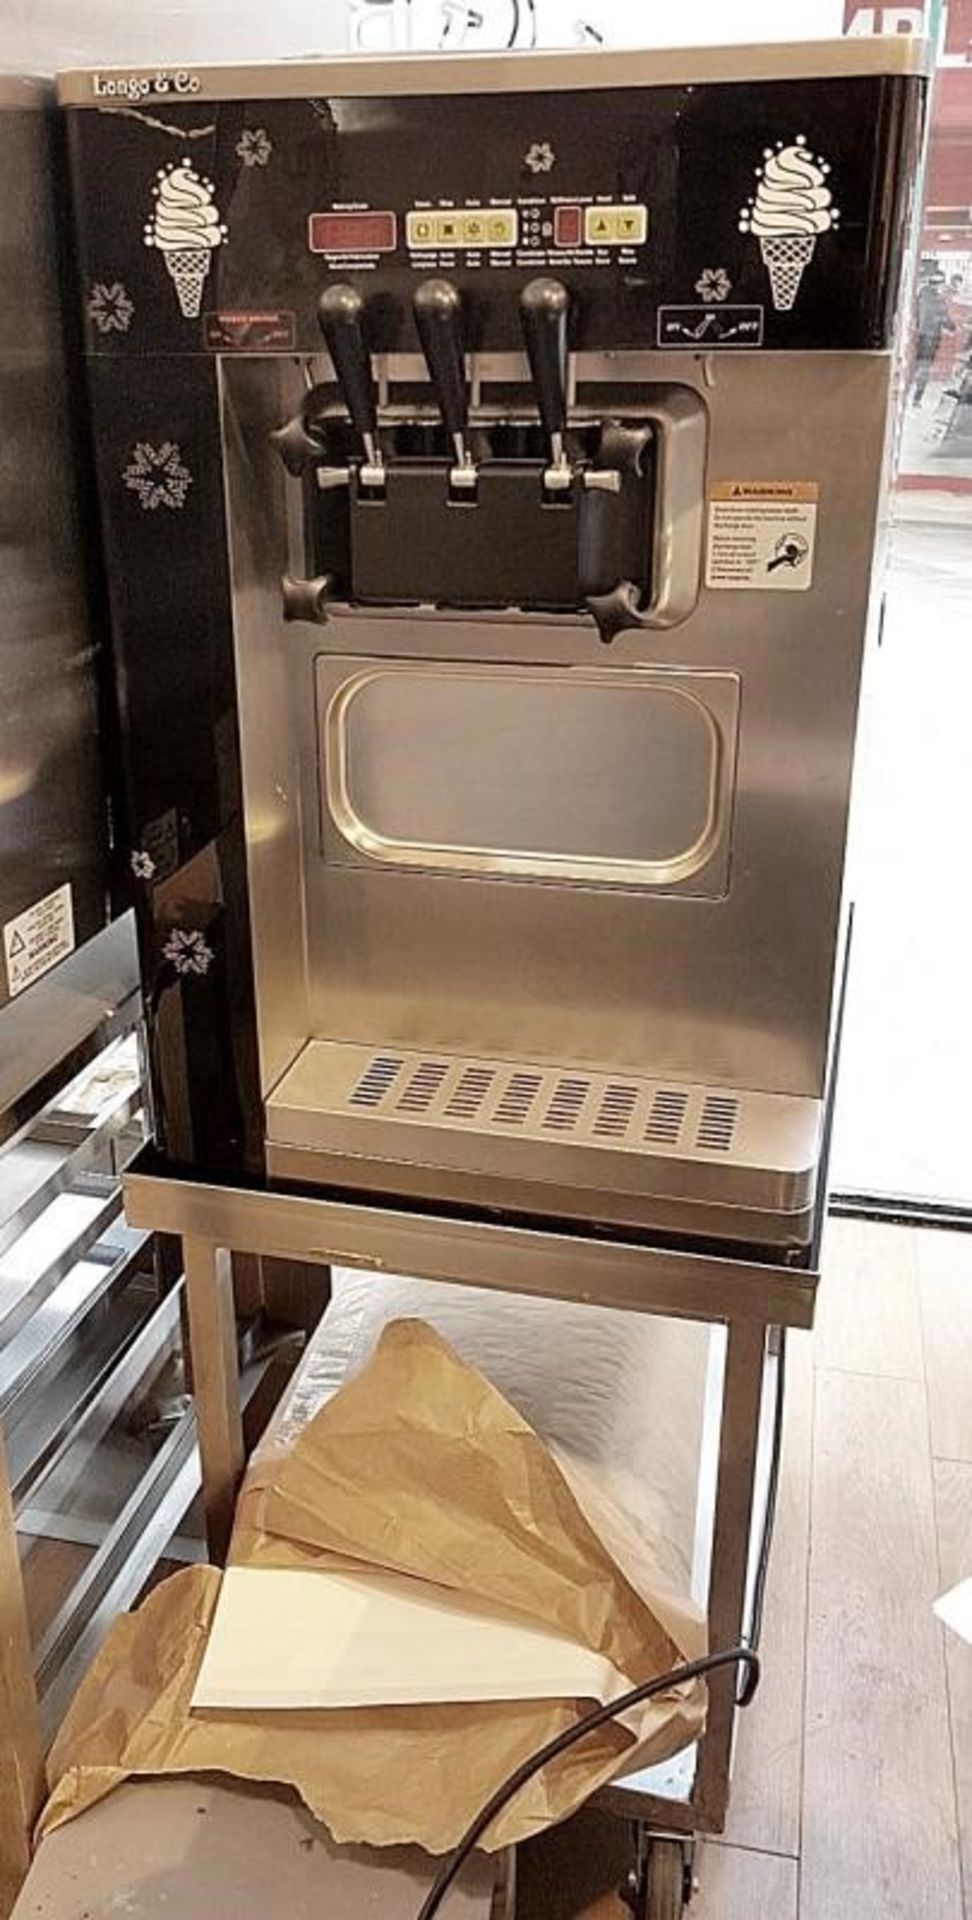 1 x Artic 132BA Commercial Ice-cream Machine And Stand - Around 12 Months Old In Great Condition - F - Image 6 of 11